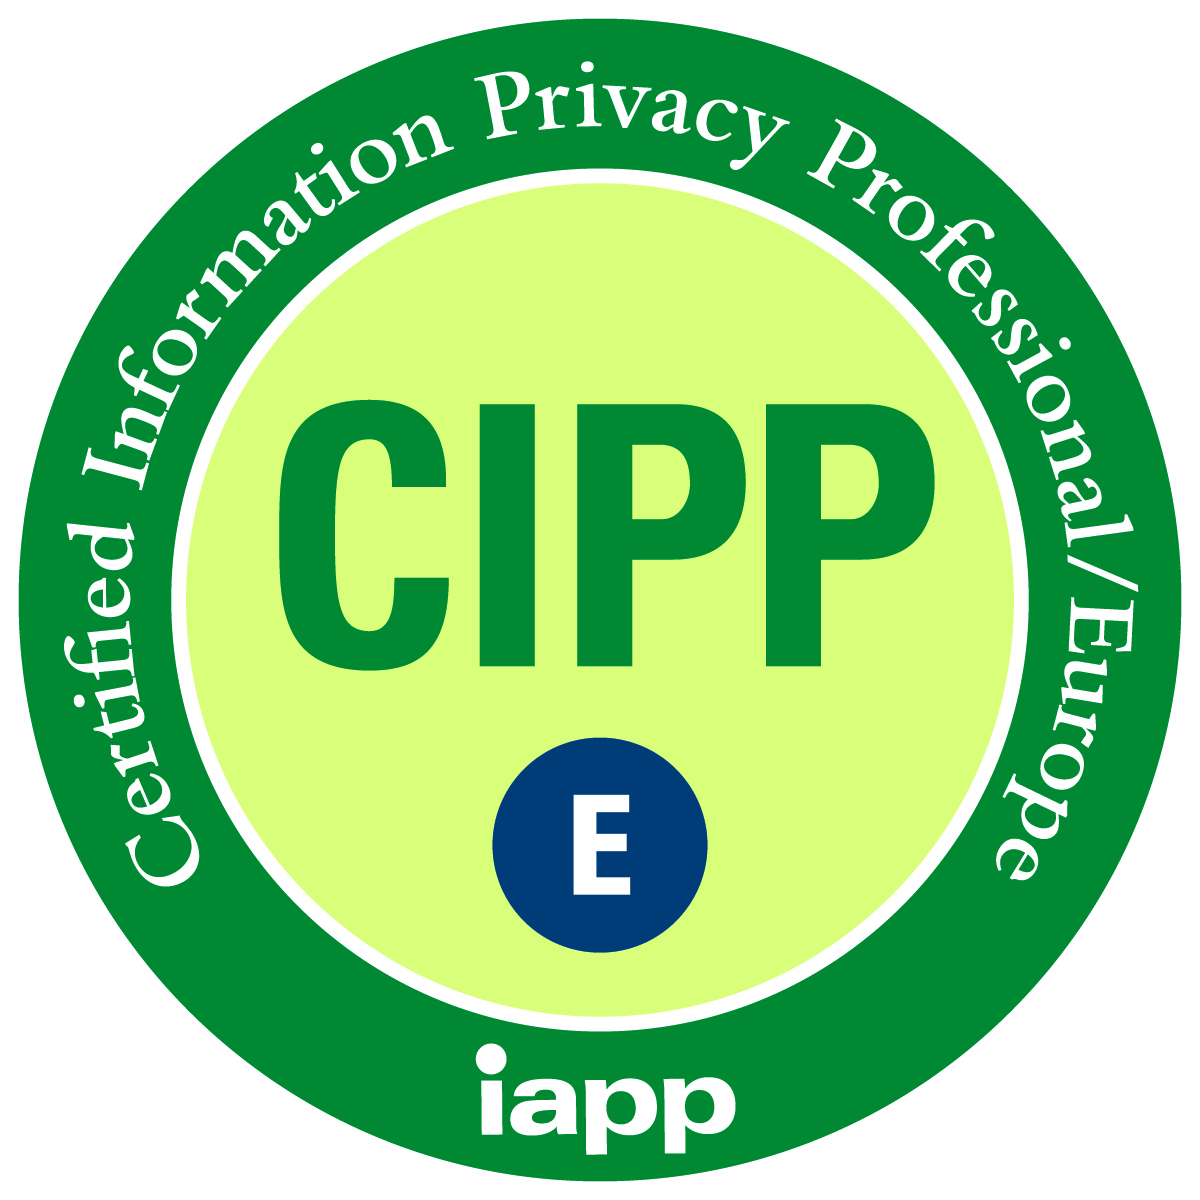 Certified Information Privacy Professional/Europe (CIPP/E) - Exam included - IN PERSON